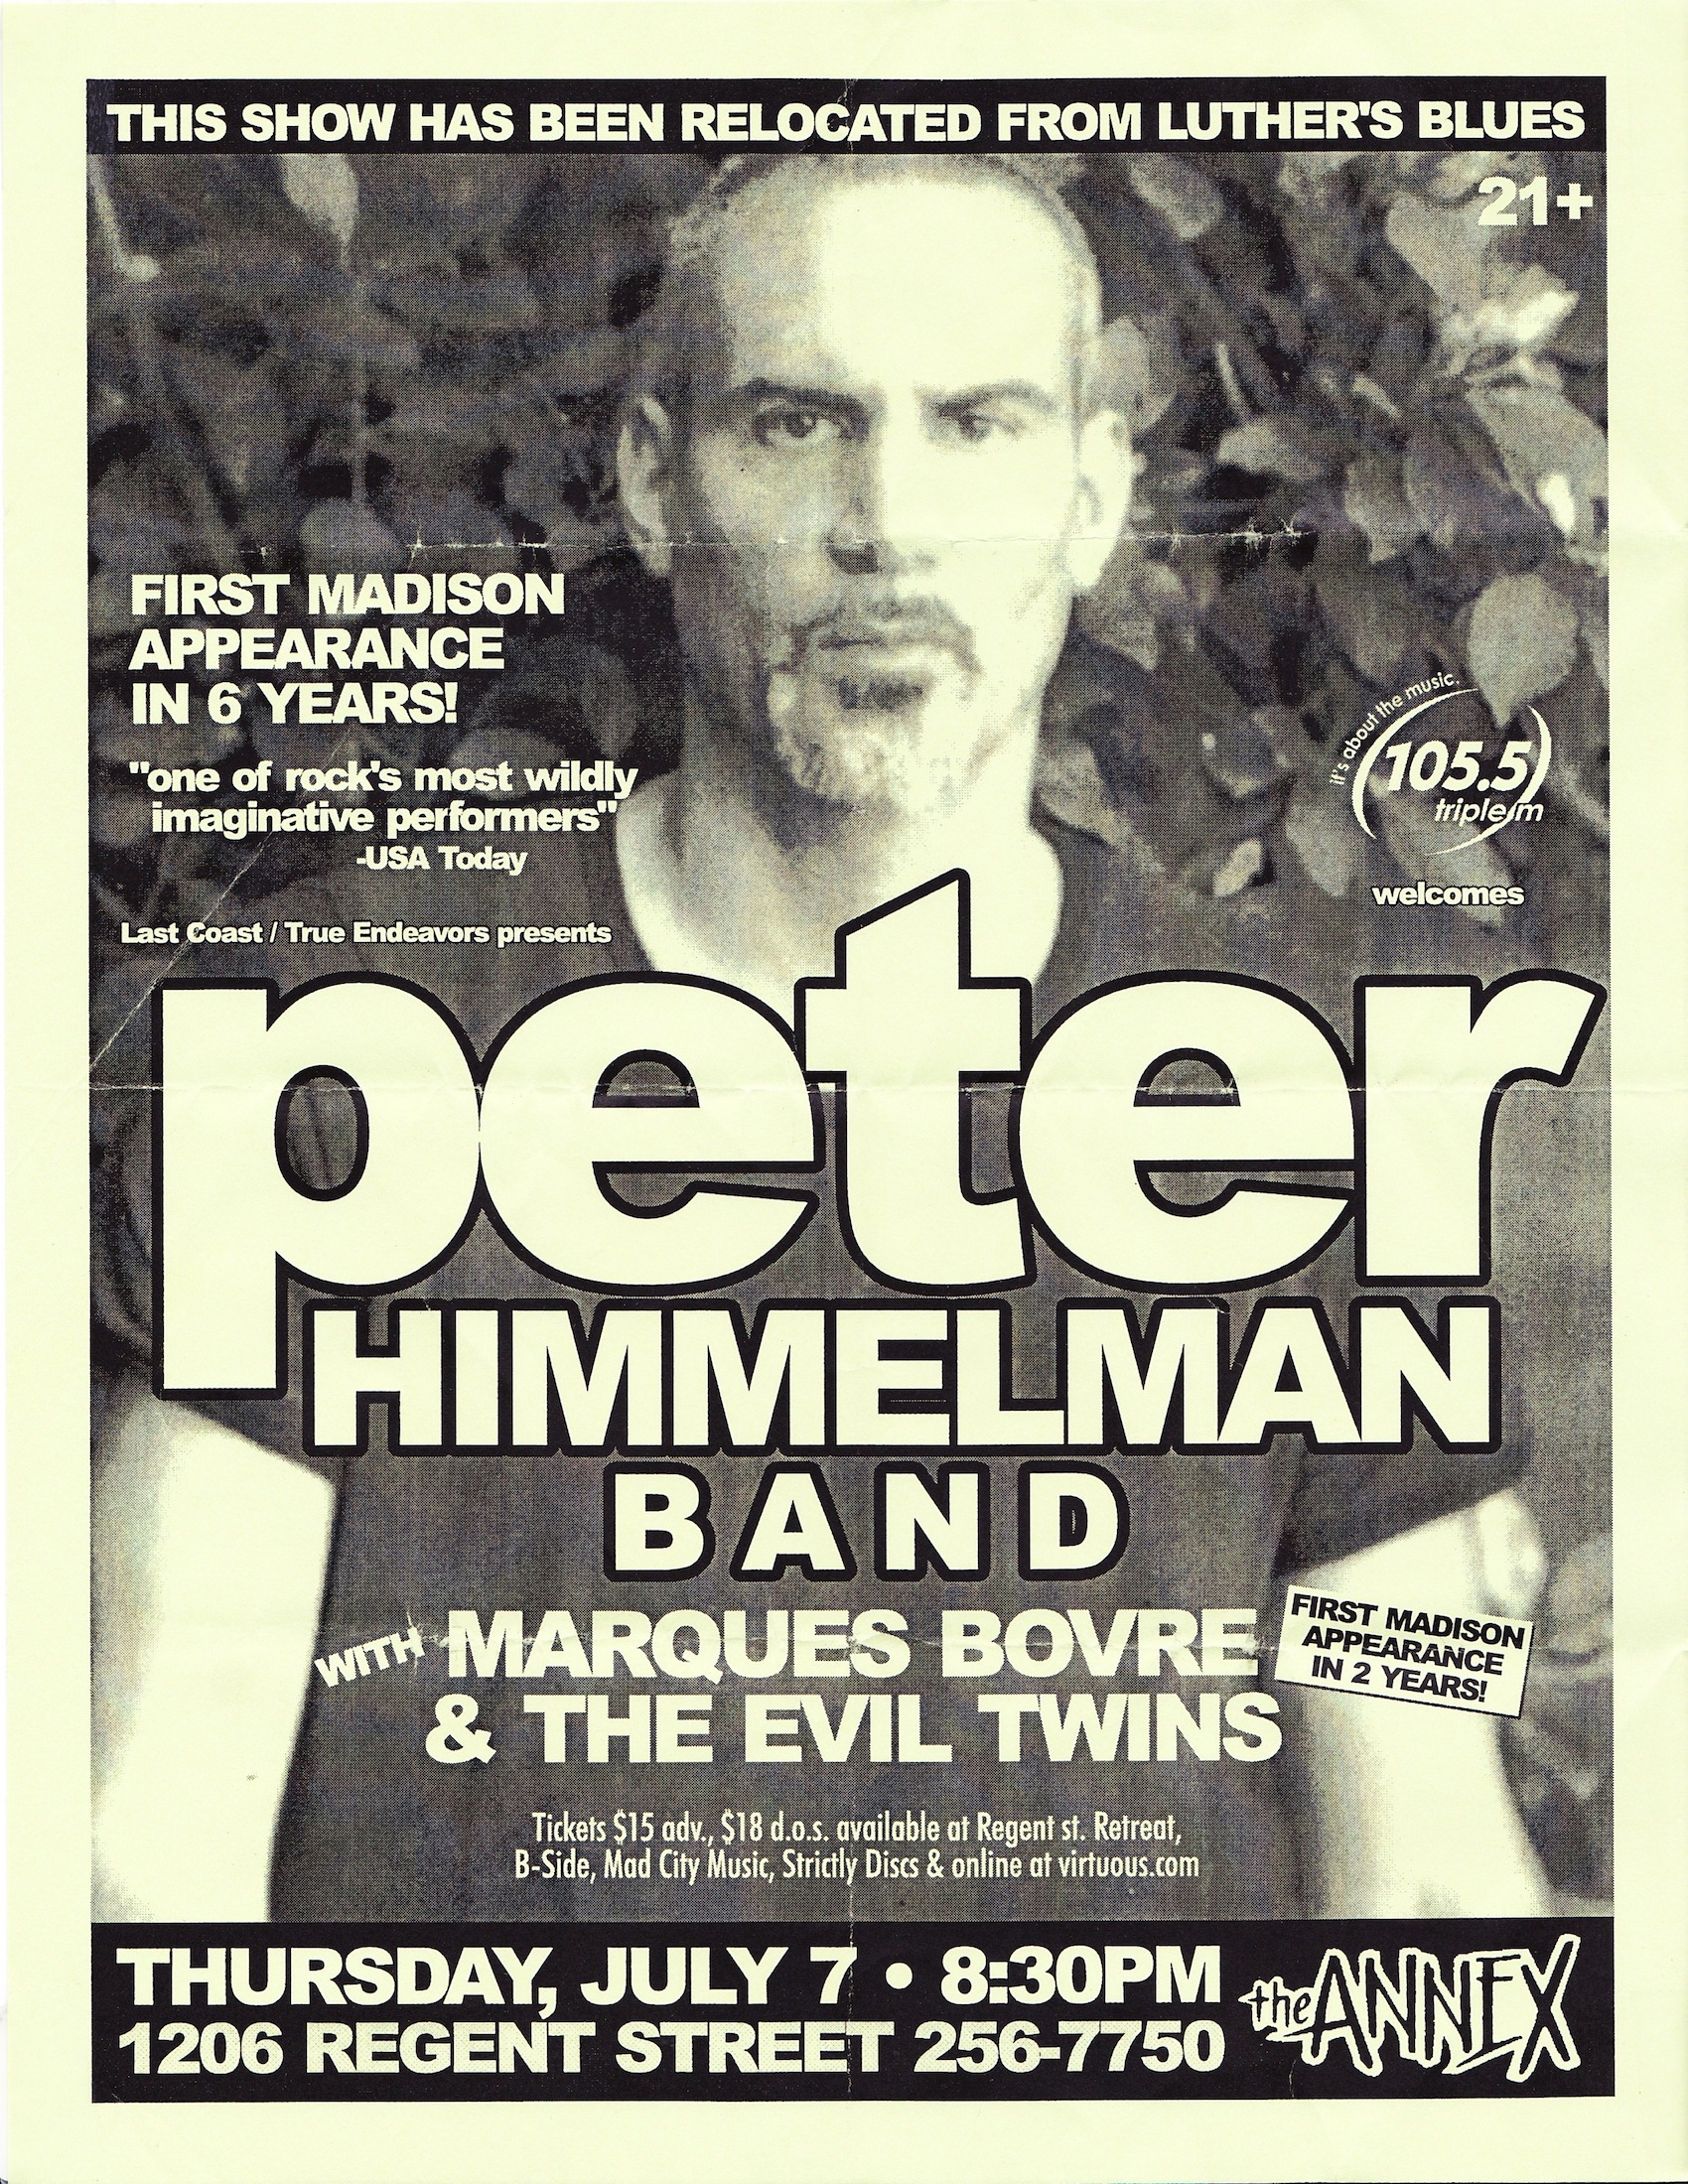 Marques Bovre and the Evil Twins, opening for Peter Himmelman July 7, 2005